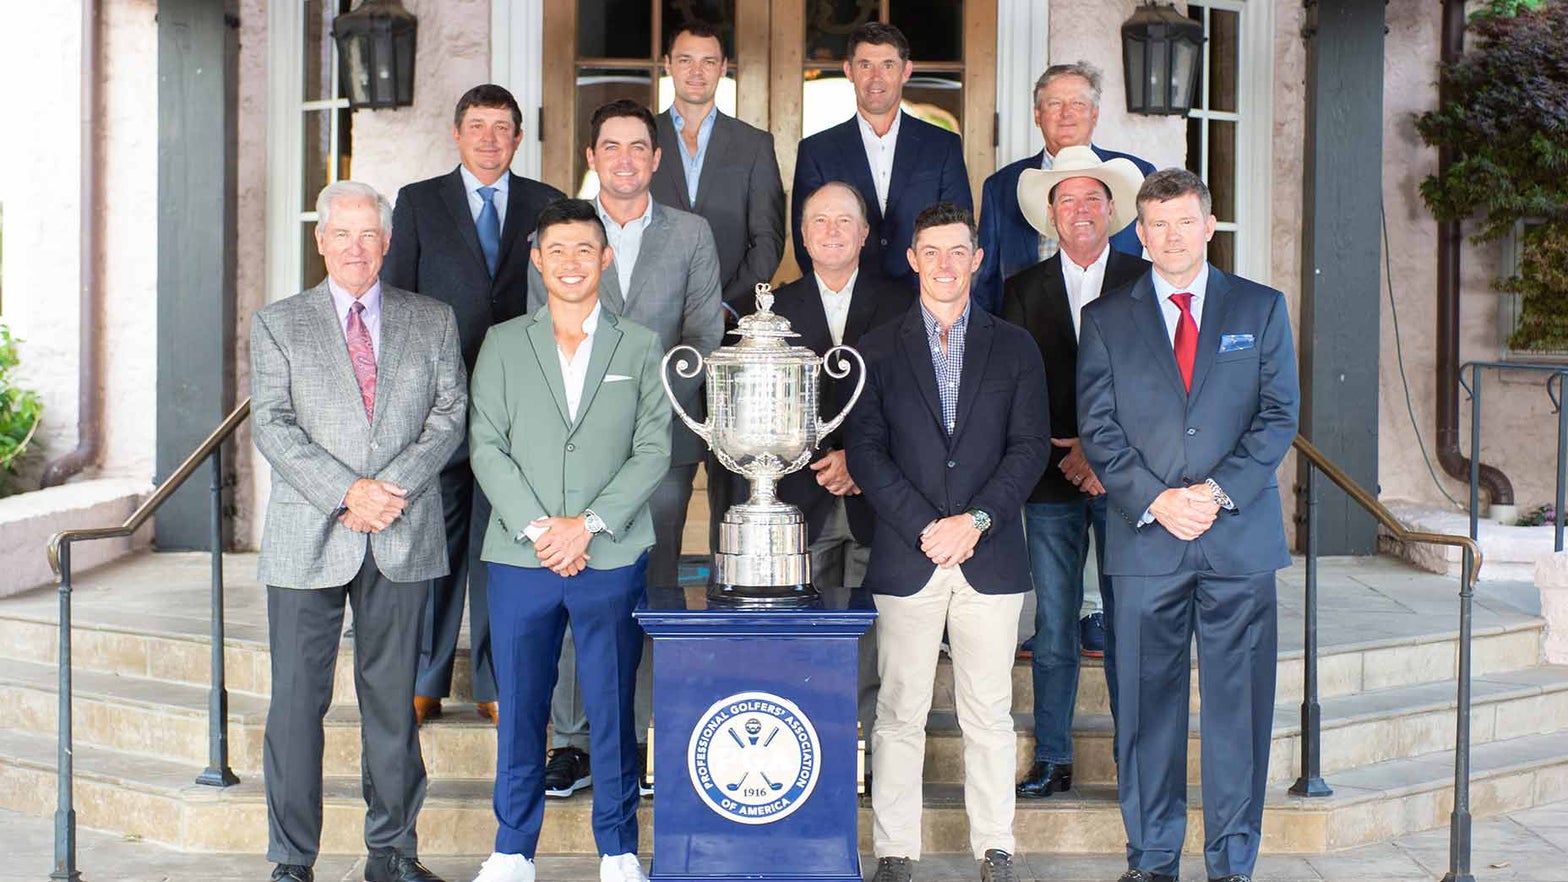 The PGA Championship's Champions Dinner? Here's what sets it apart